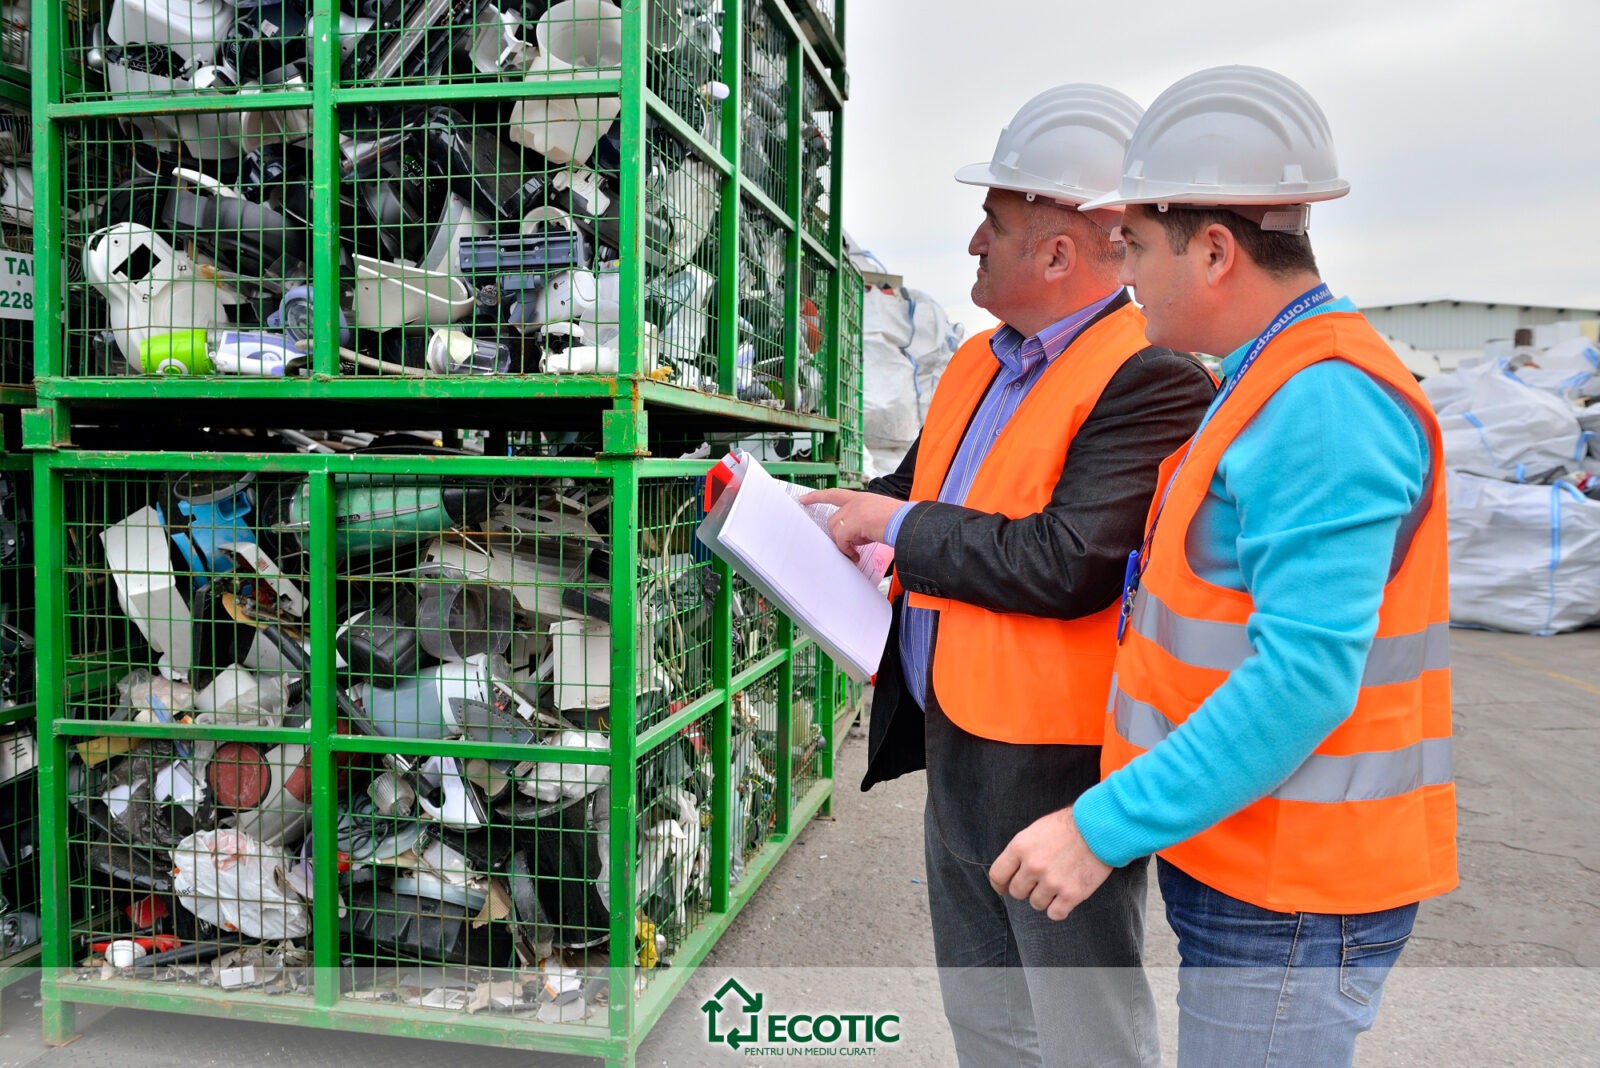 ECOTIC REPORTS 100 000 TONS OF ELECTRIC WASTE COLLECTED